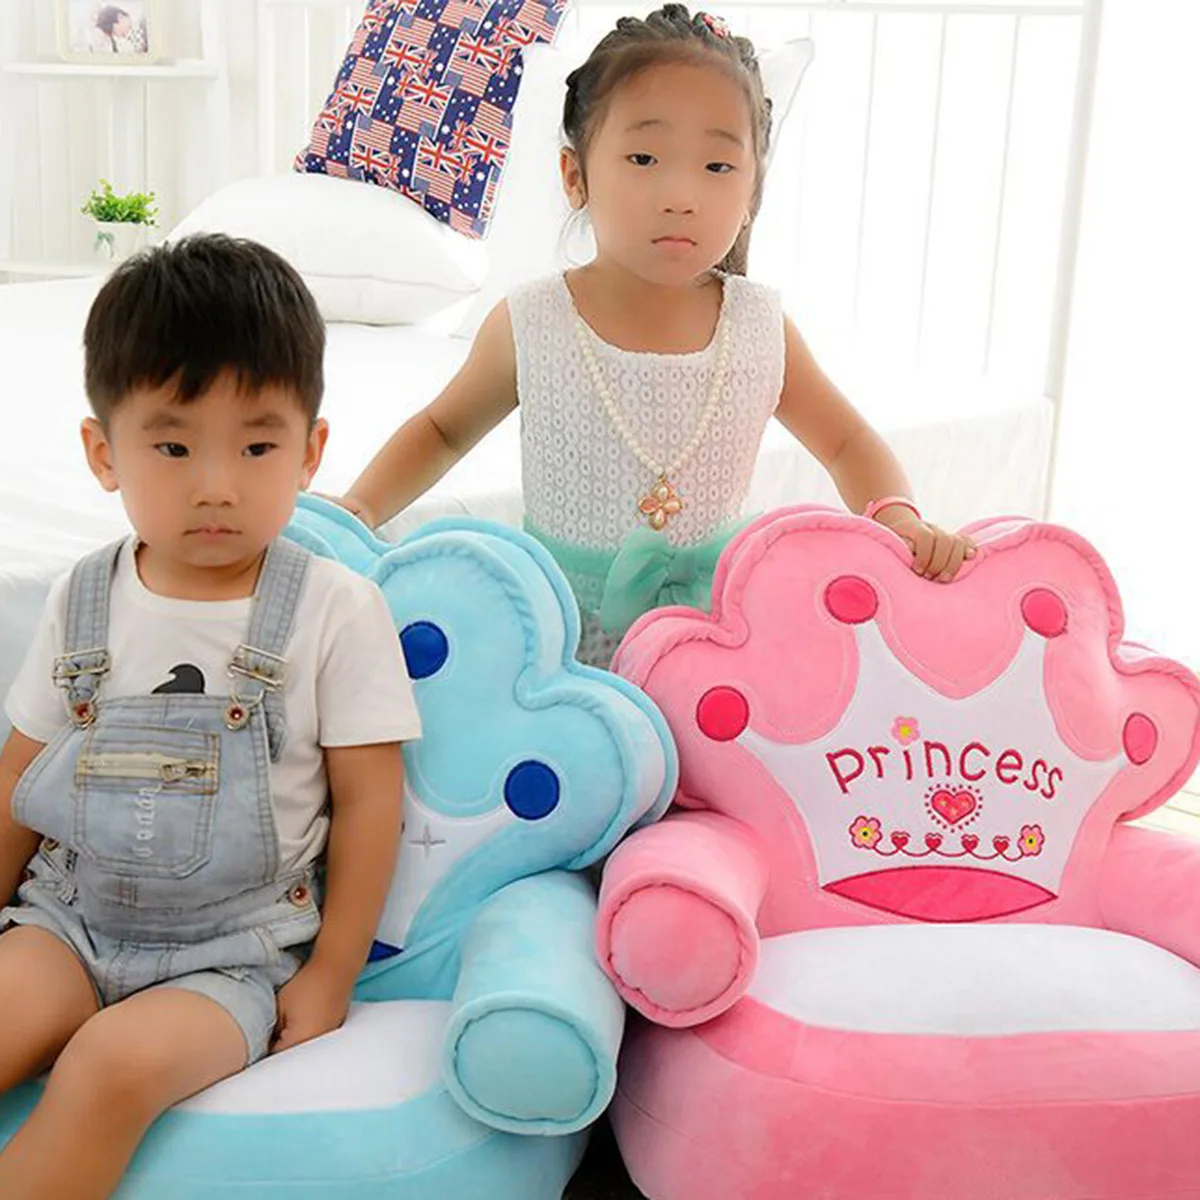 Inflatable Chair Cushion Sofa Kids Children Baby Portable Seat Support Bag Cartoon Crown Seat Game Plush Only Cover No Filling от AliExpress WW